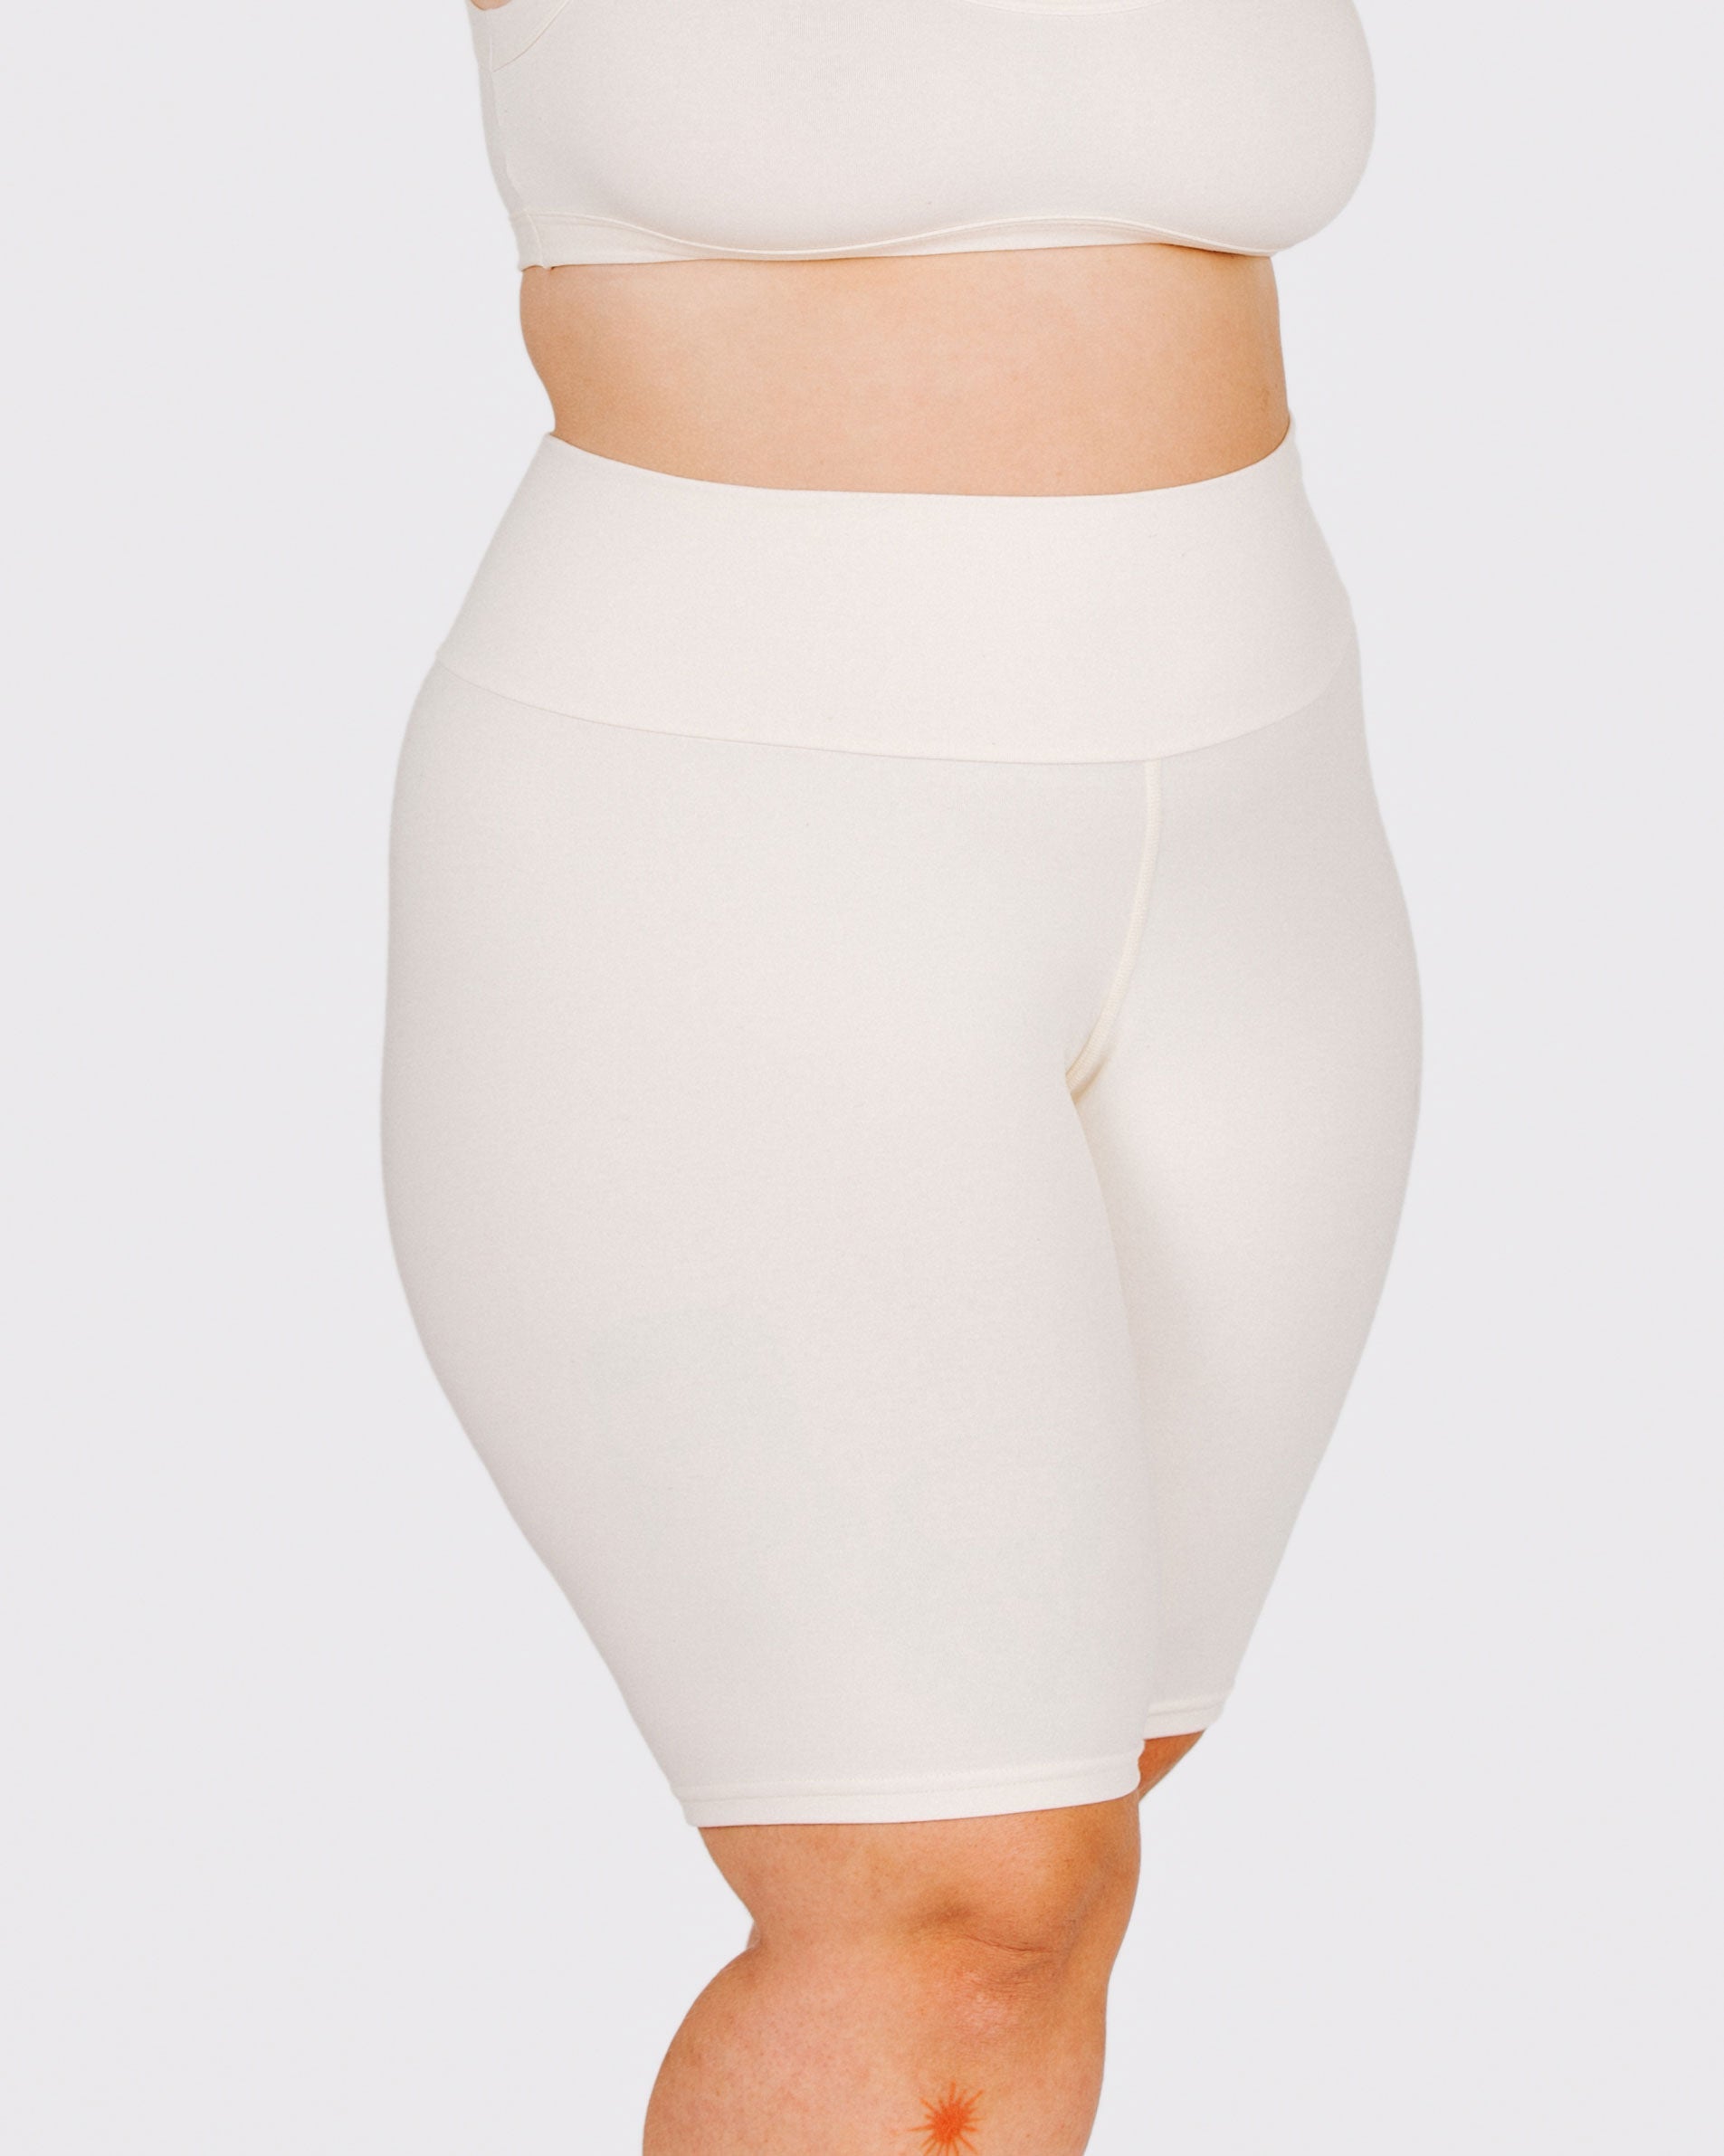 Fit photo from the front of Thunderpants organic cotton Bike Shorts in off-white on a model.